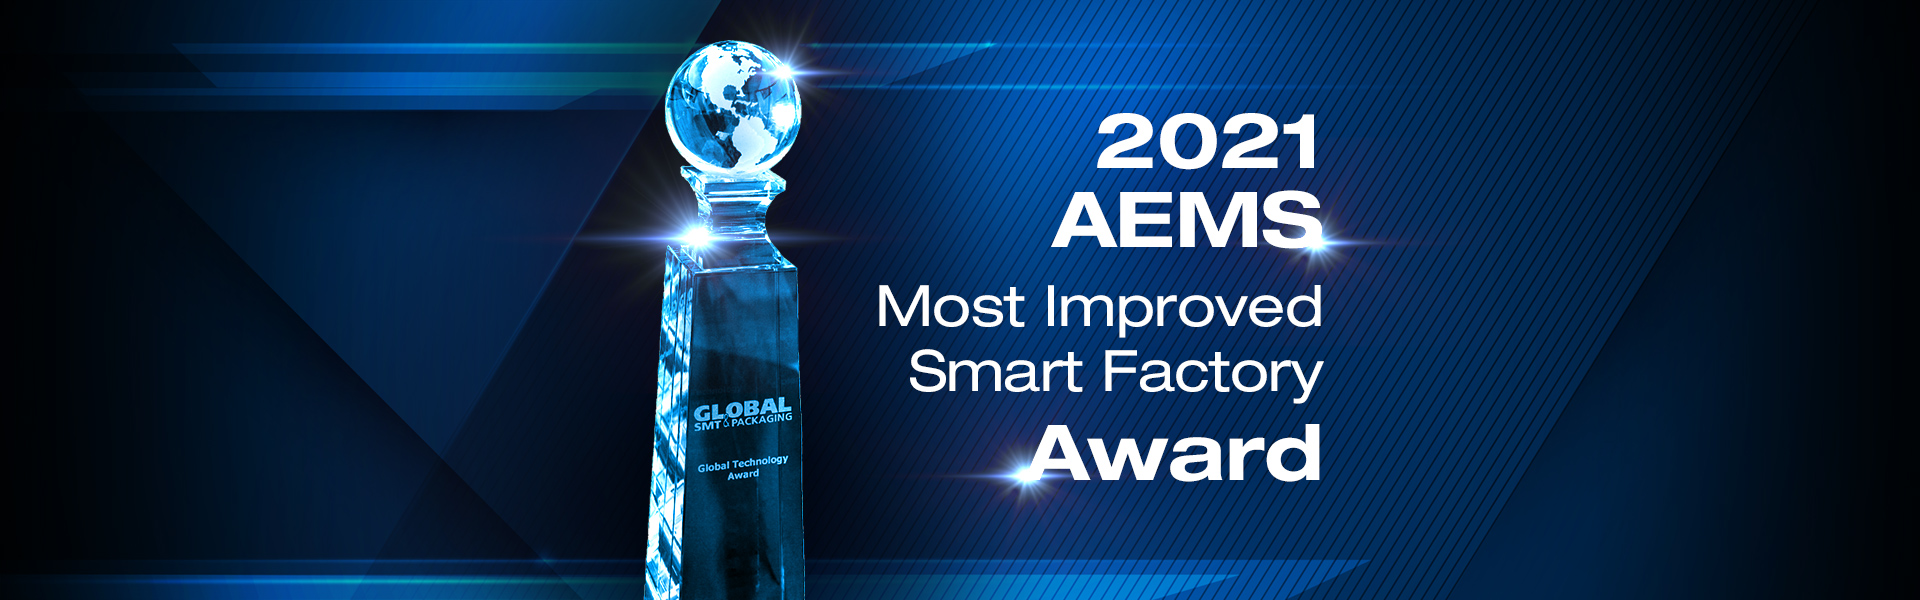 2021 GLOBAL Technology Award for Most Improved Smart Factory